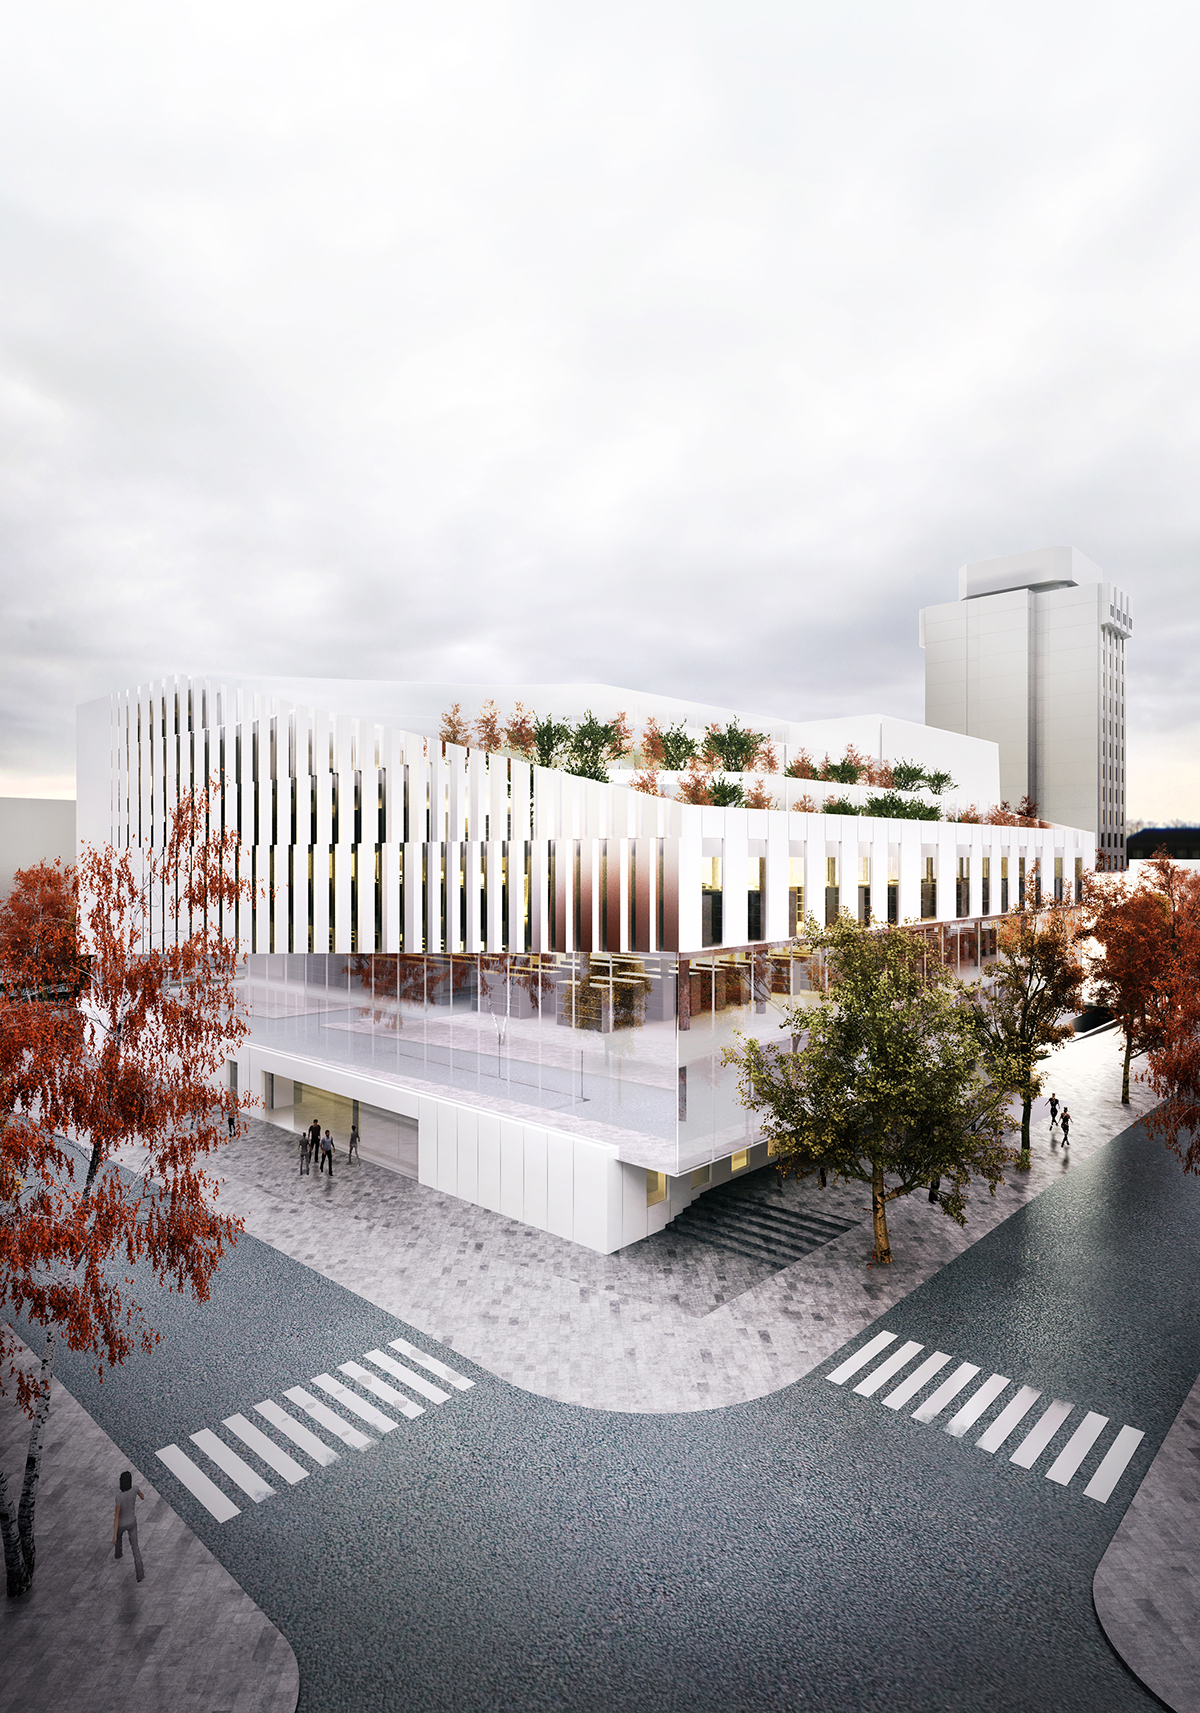 library Varna Competition rendering library interior public building exterior chanel glass polished steel contemporary building